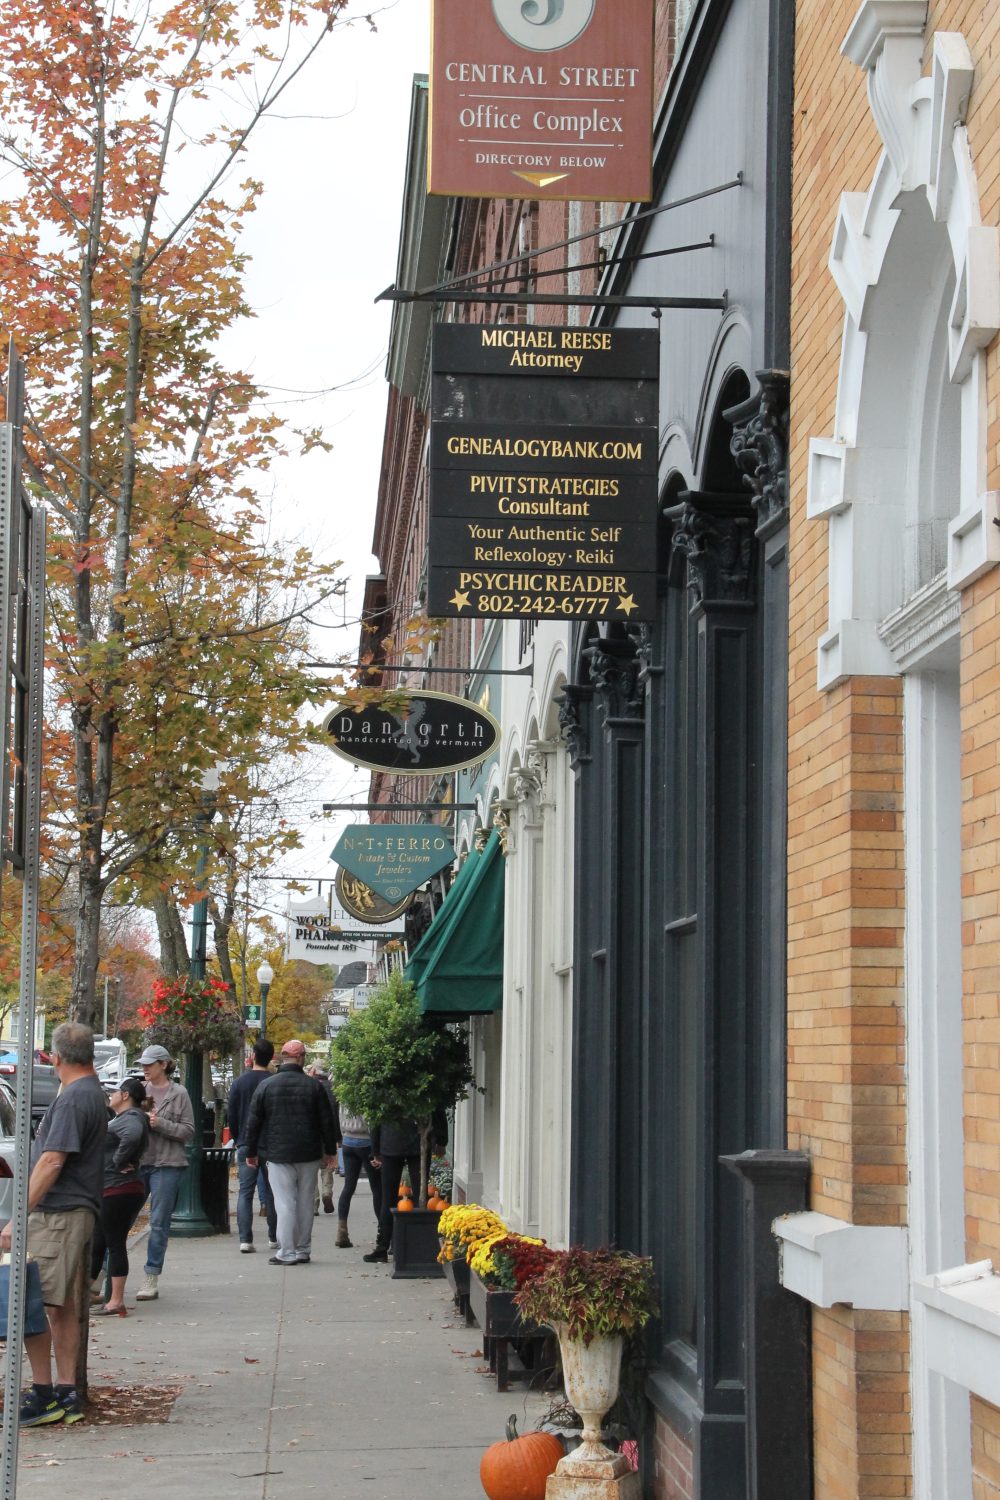 Streets lined with small shops in Woodstock, Vermont